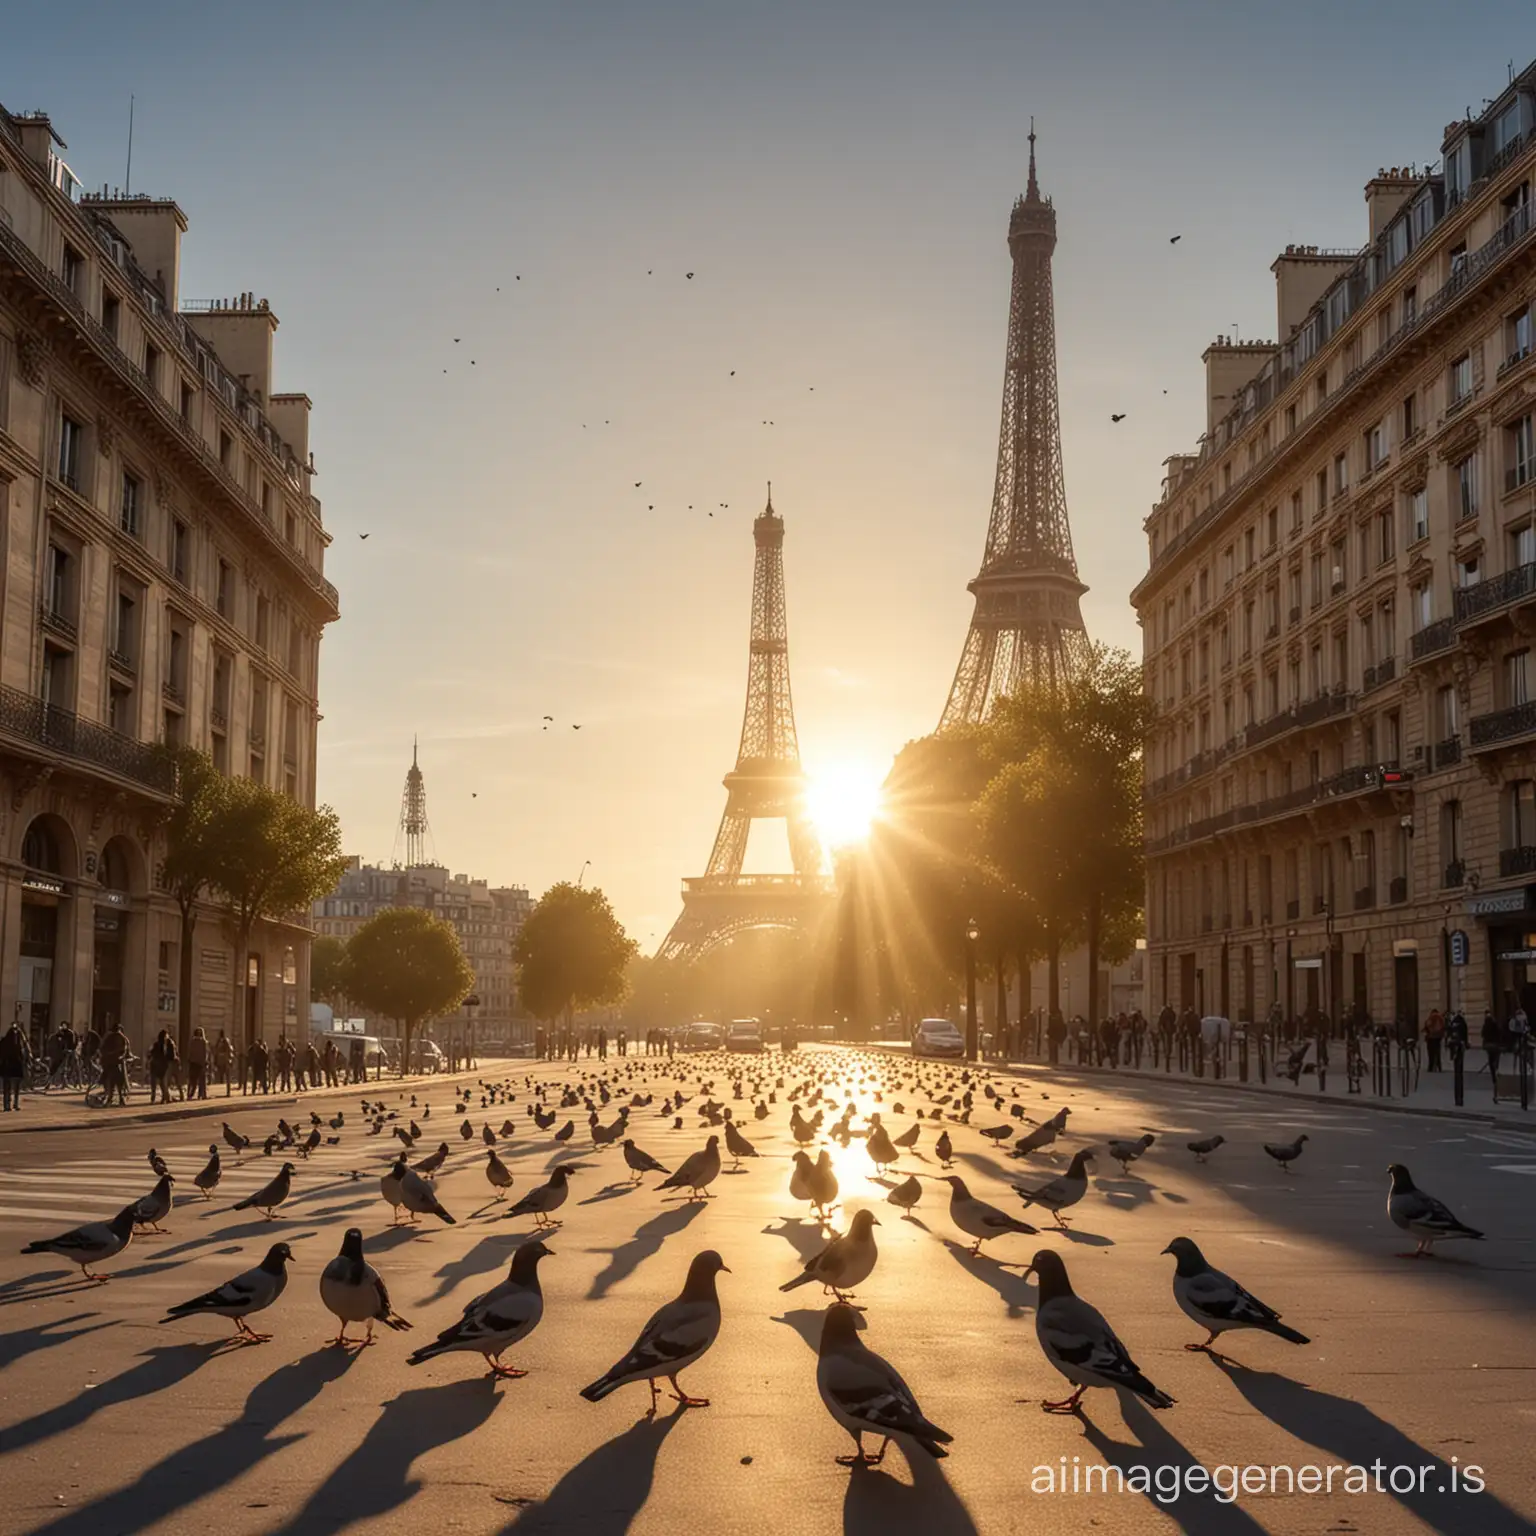 Sunset-Serenity-at-the-Eiffel-Tower-with-Pigeons-and-Street-Shadows